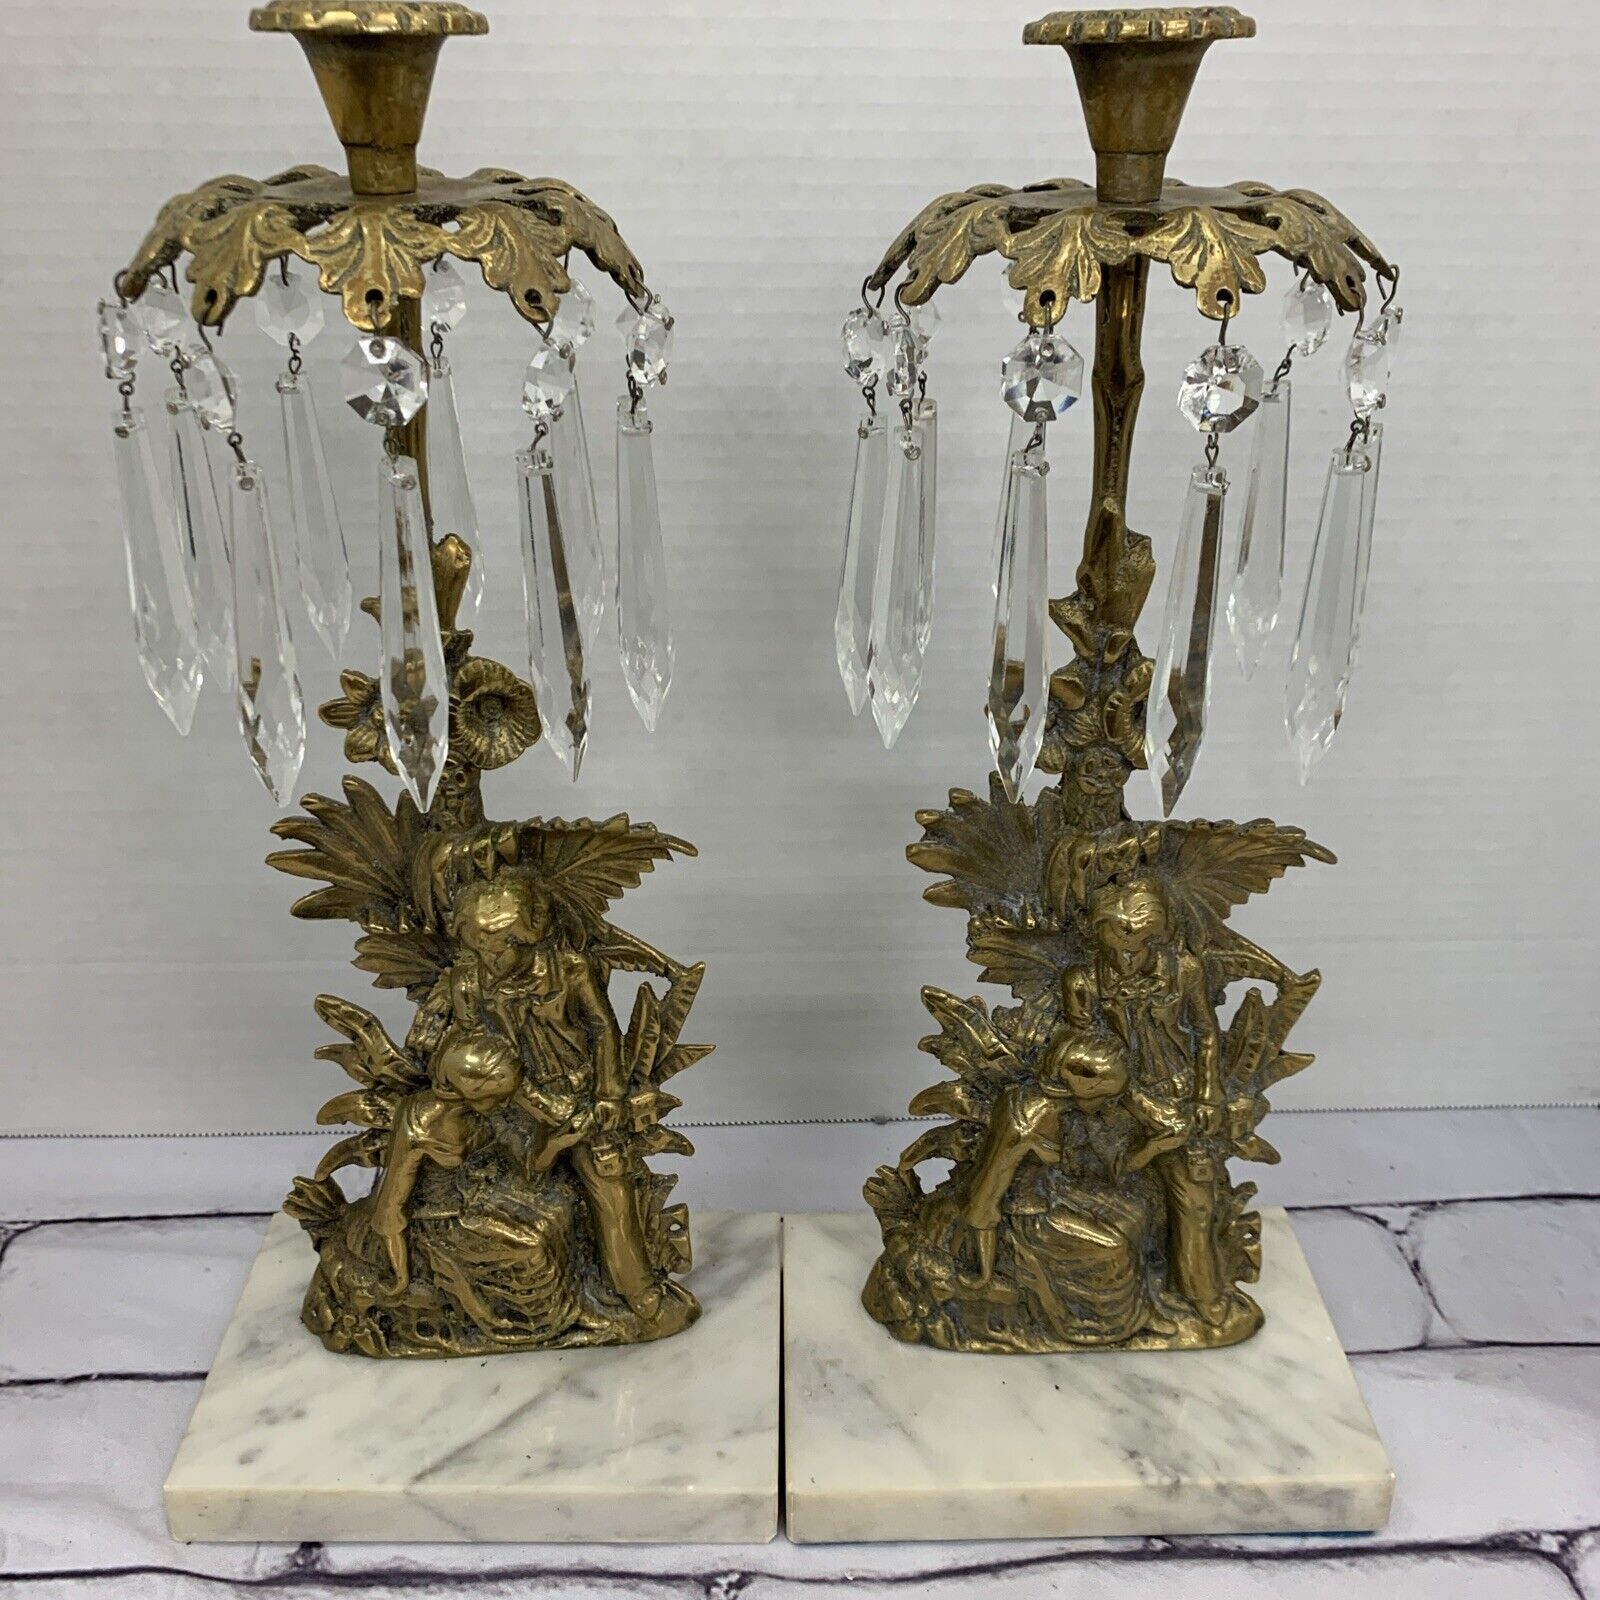 Antique Brass Tabletop Candle Holders With Glass Prisom